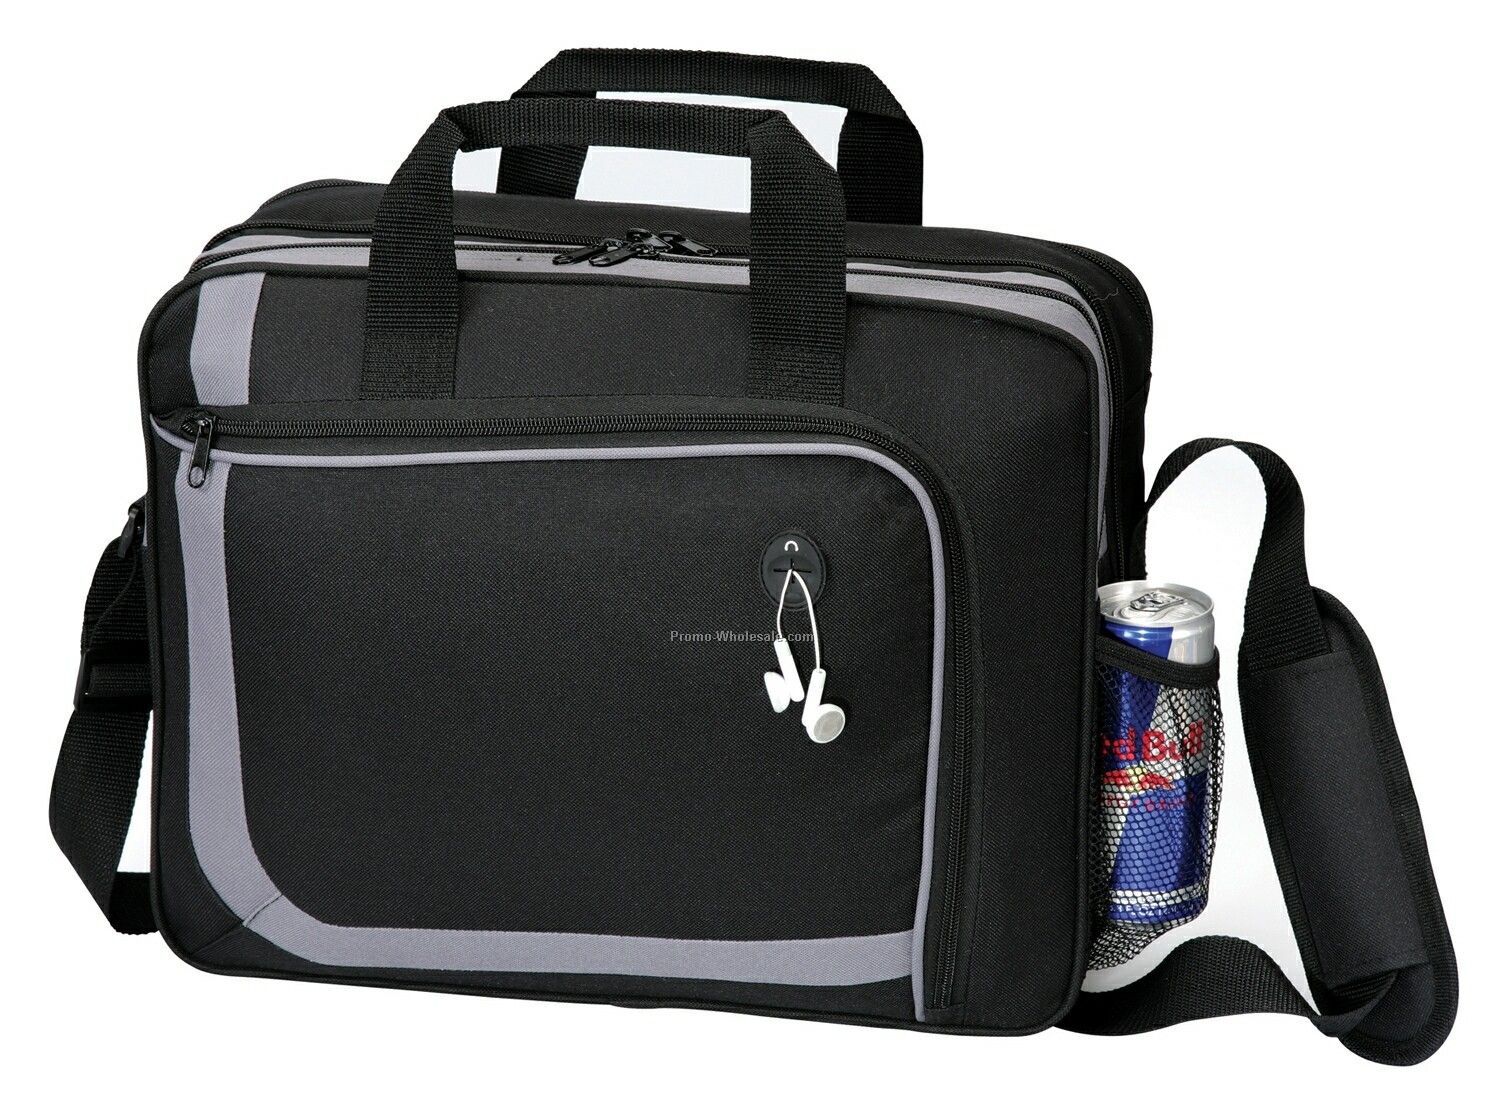 The Instructor Laptop/ Briefcase